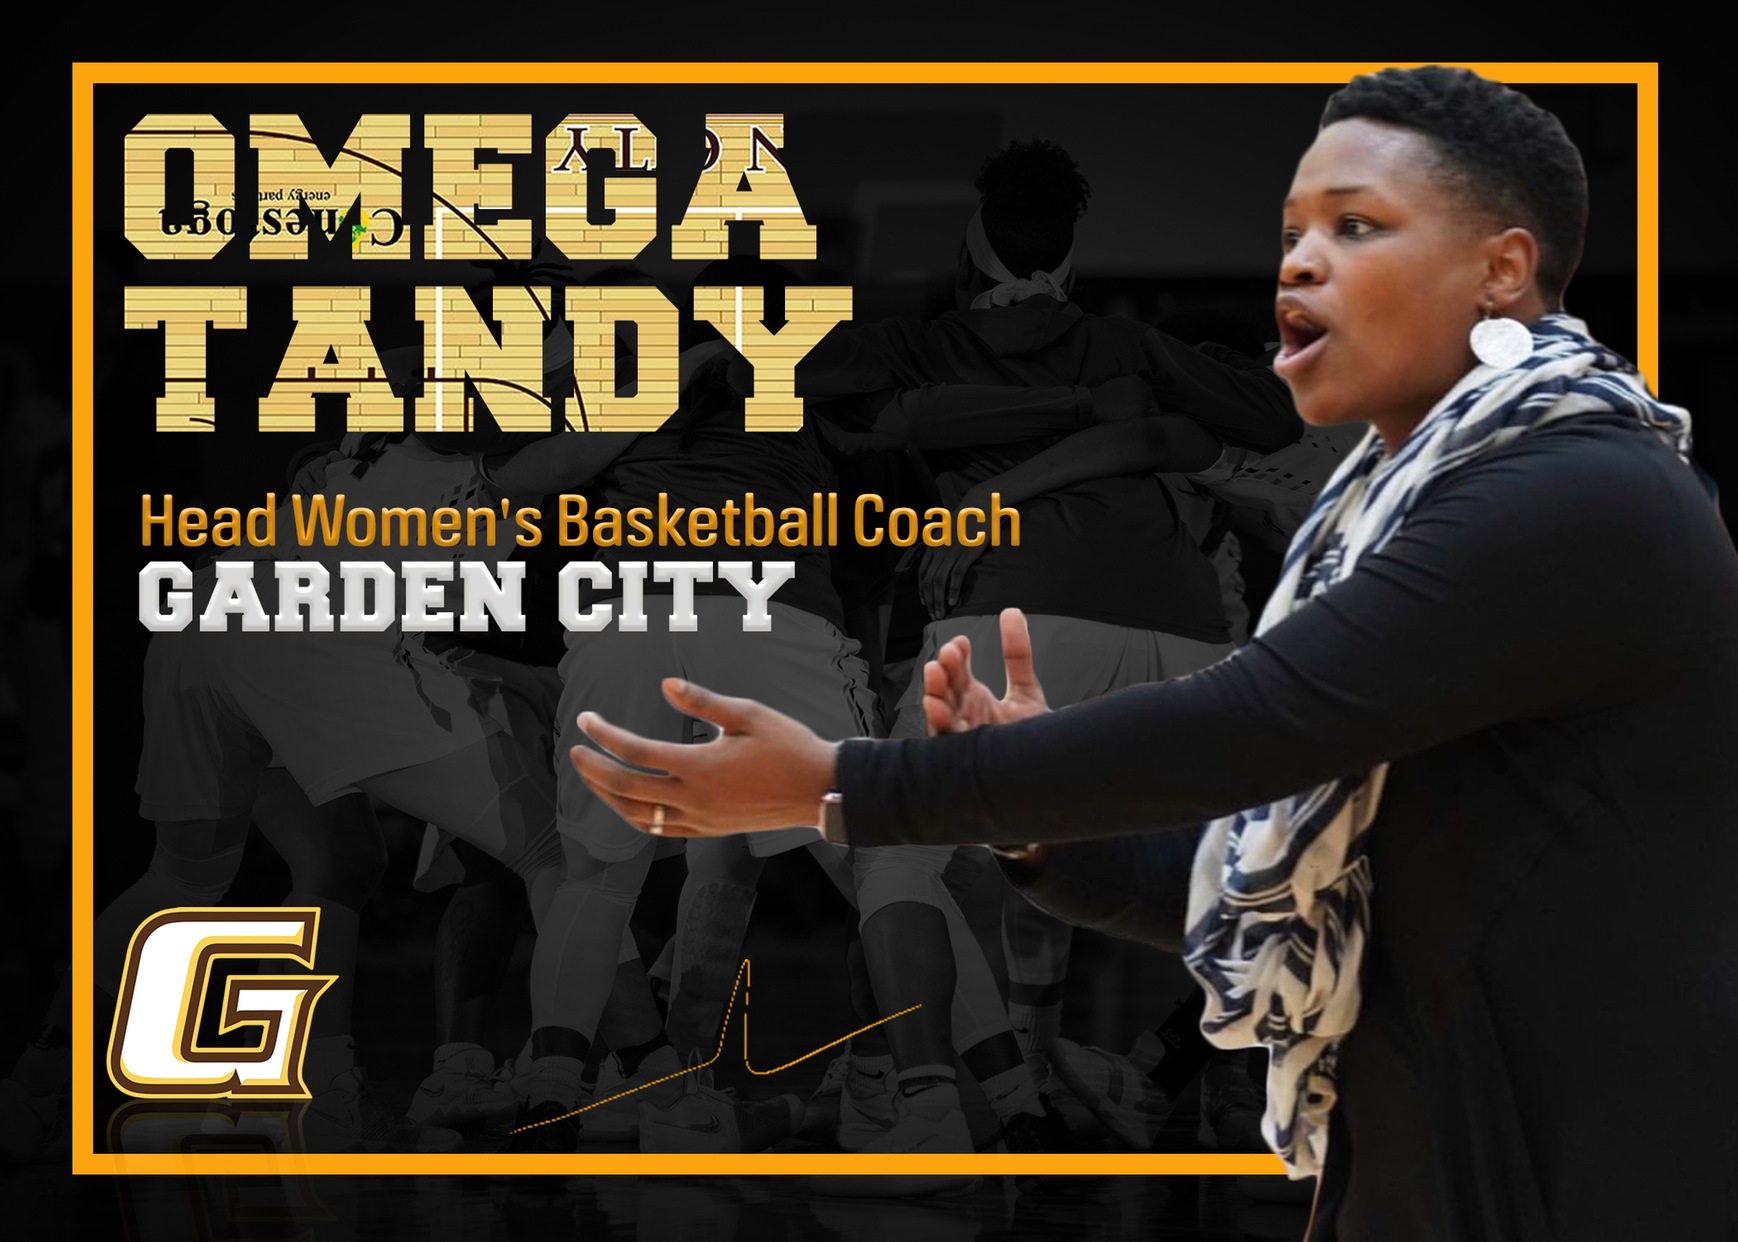 Tandy named new women's basketball coach